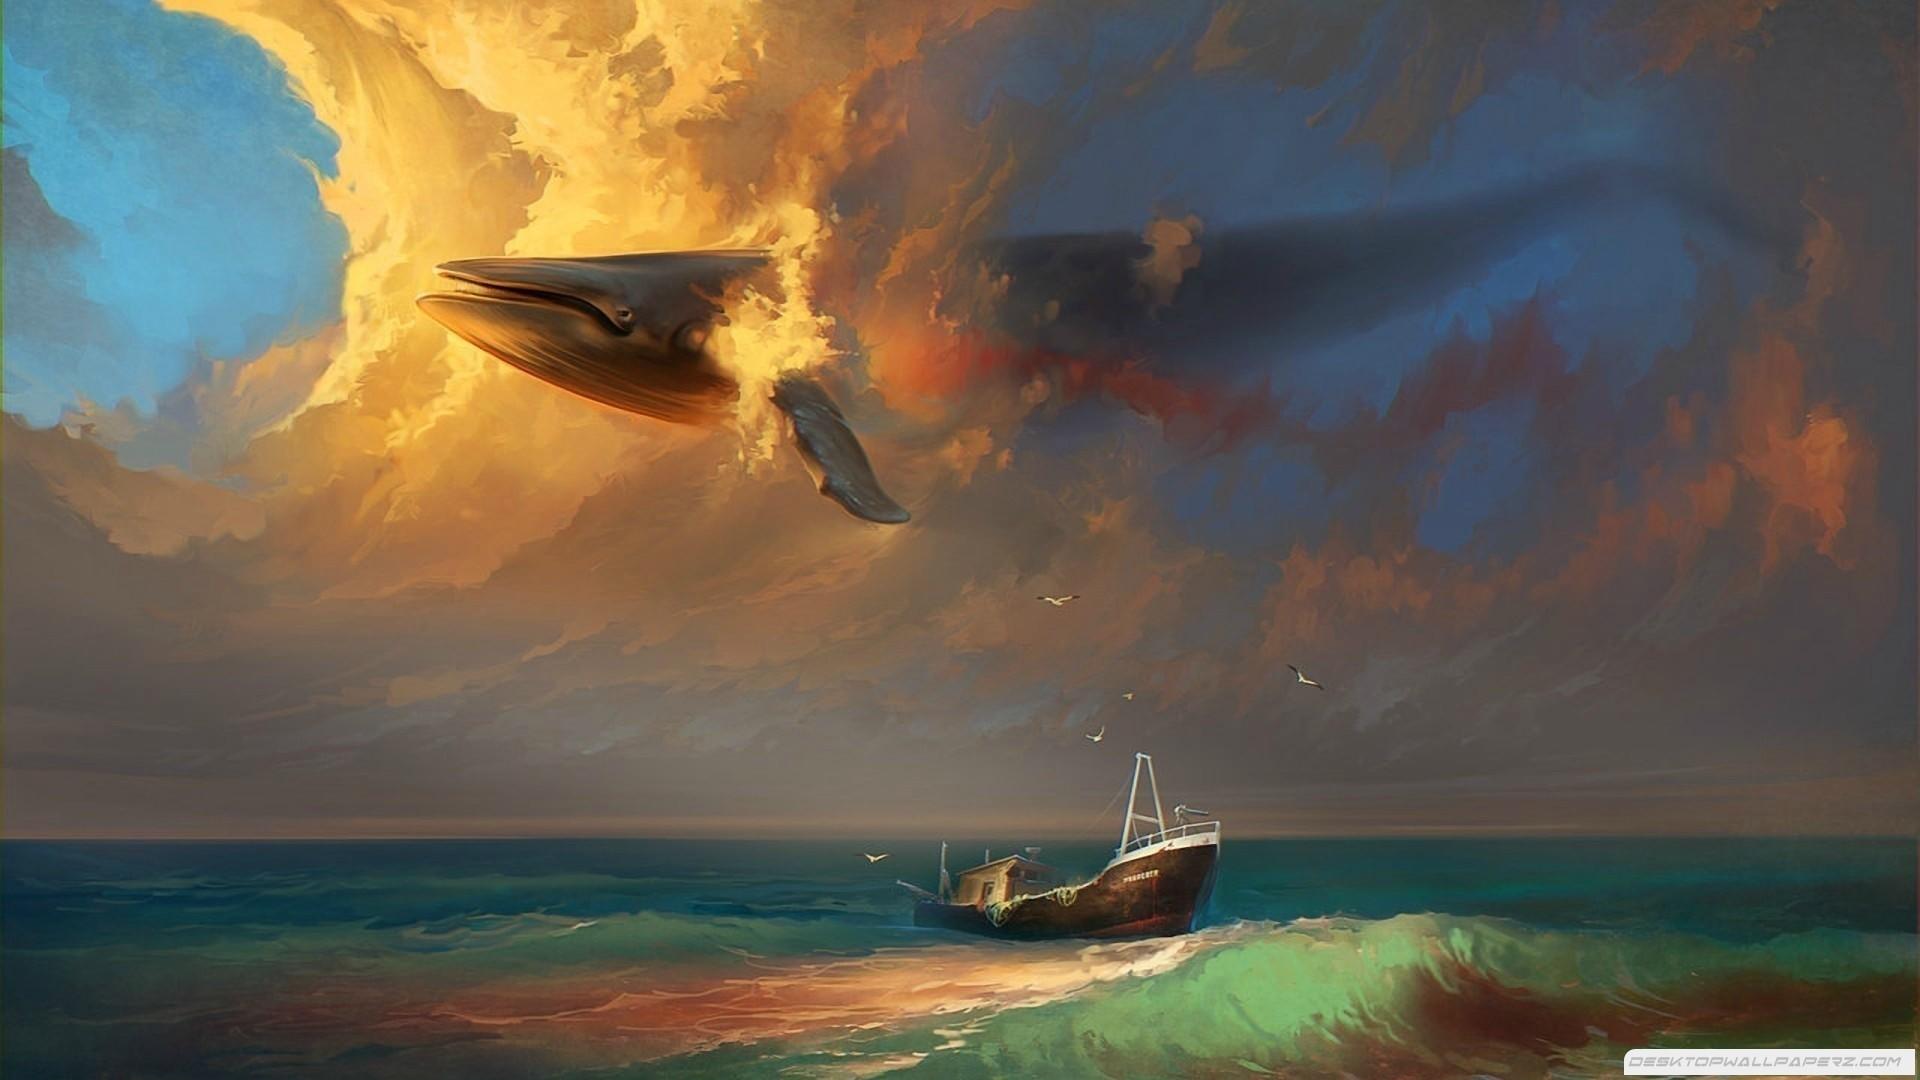 Clouds Whale Fantasy Art Boat Surreal HD Wallpaper